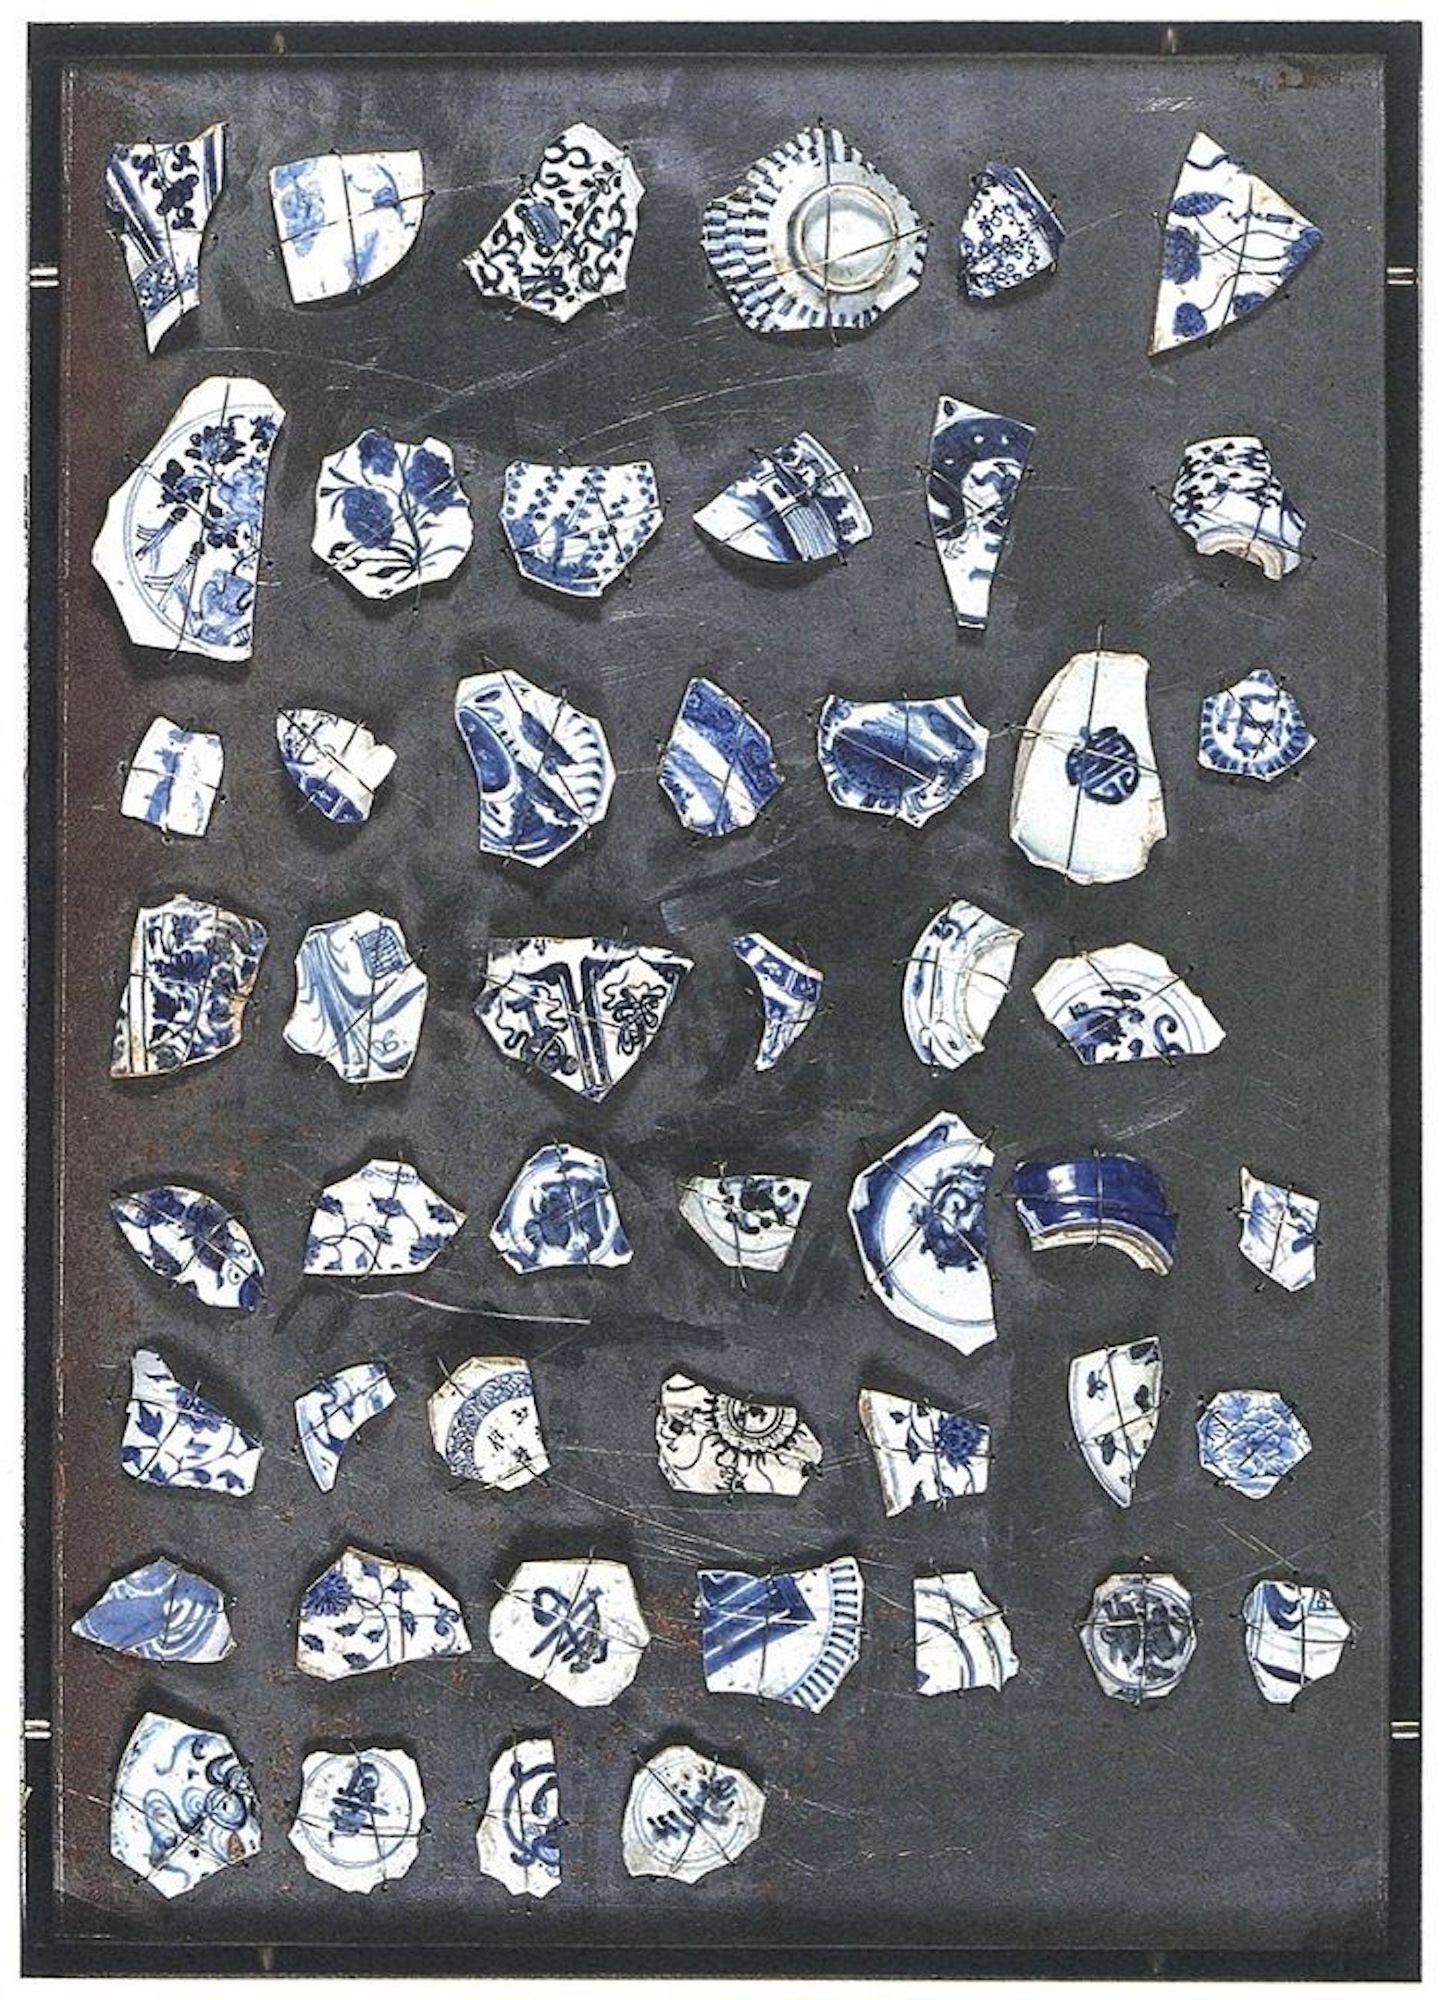 Untitled - Iron Plate, Ancient Chinese Porcelain Fragments, Steel Wire - 2011 - Art by Yannis Kounellis